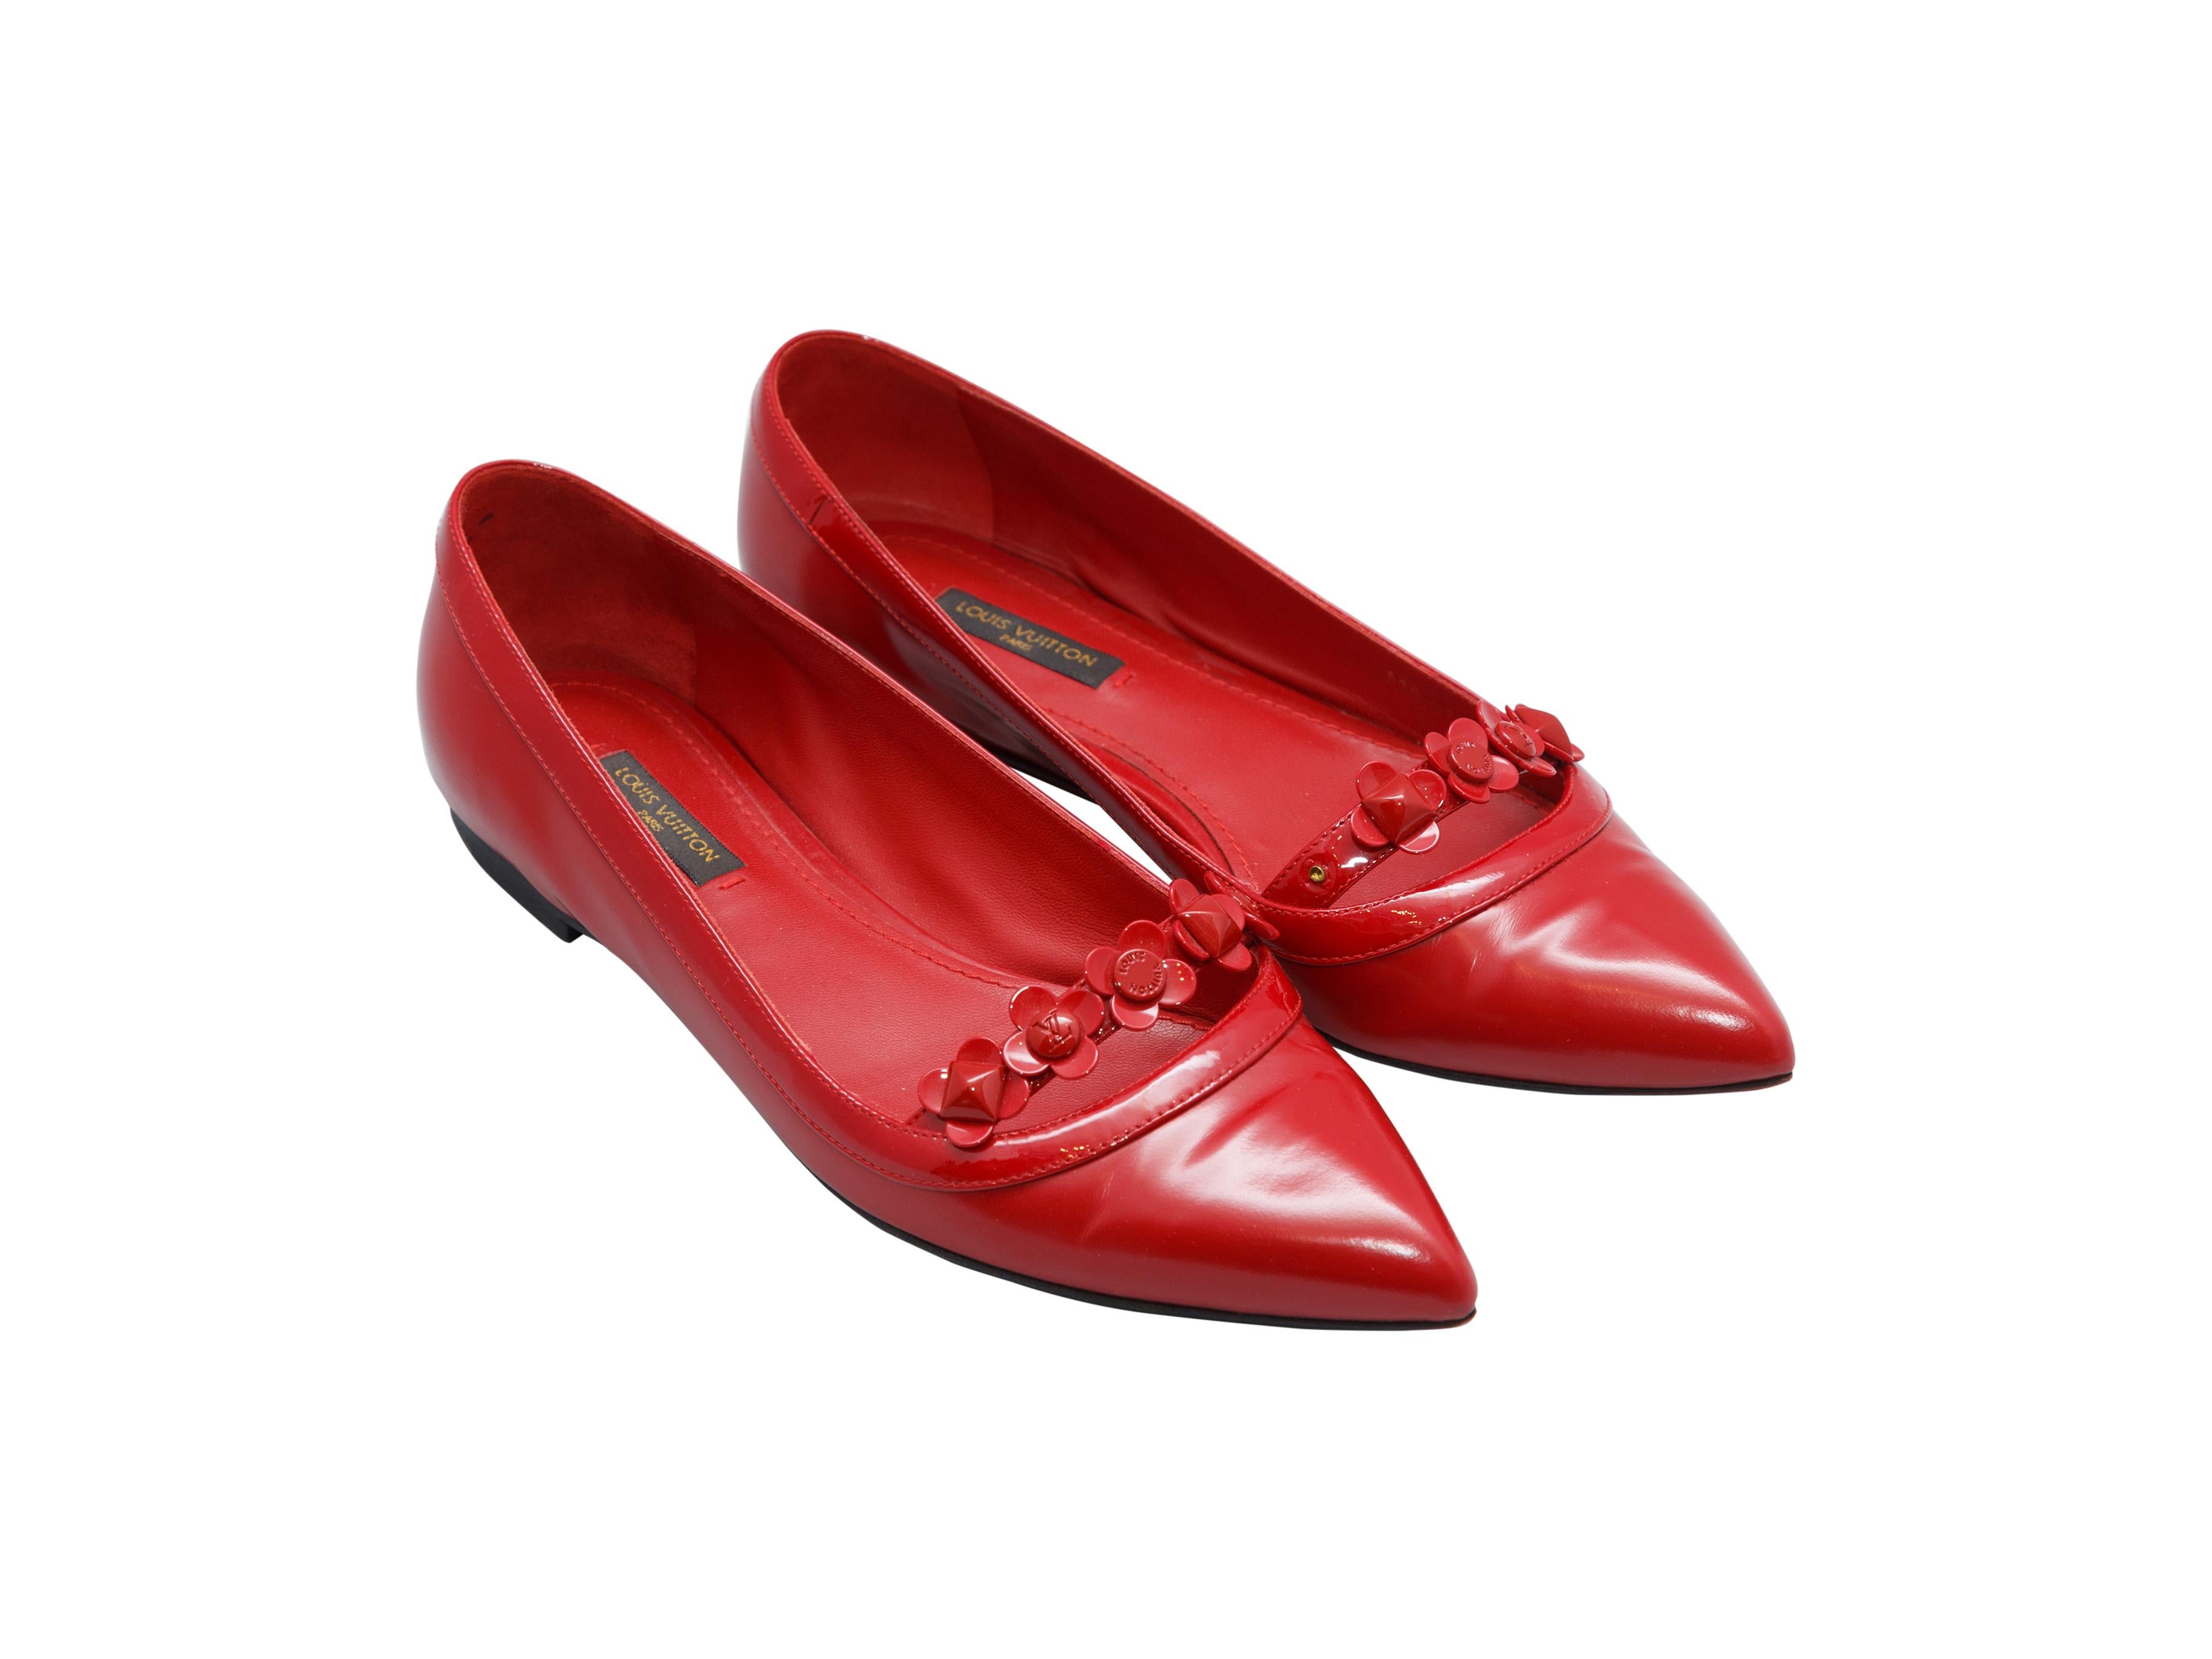 Product details: Red leather pointed-toe ballet flats by Louis Vuitton. Floral embellishments at toes. Designer size 36.5.
Condition: Pre-owned. Good. Missing embellishments at left shoe.
Est. Retail $ 795.00